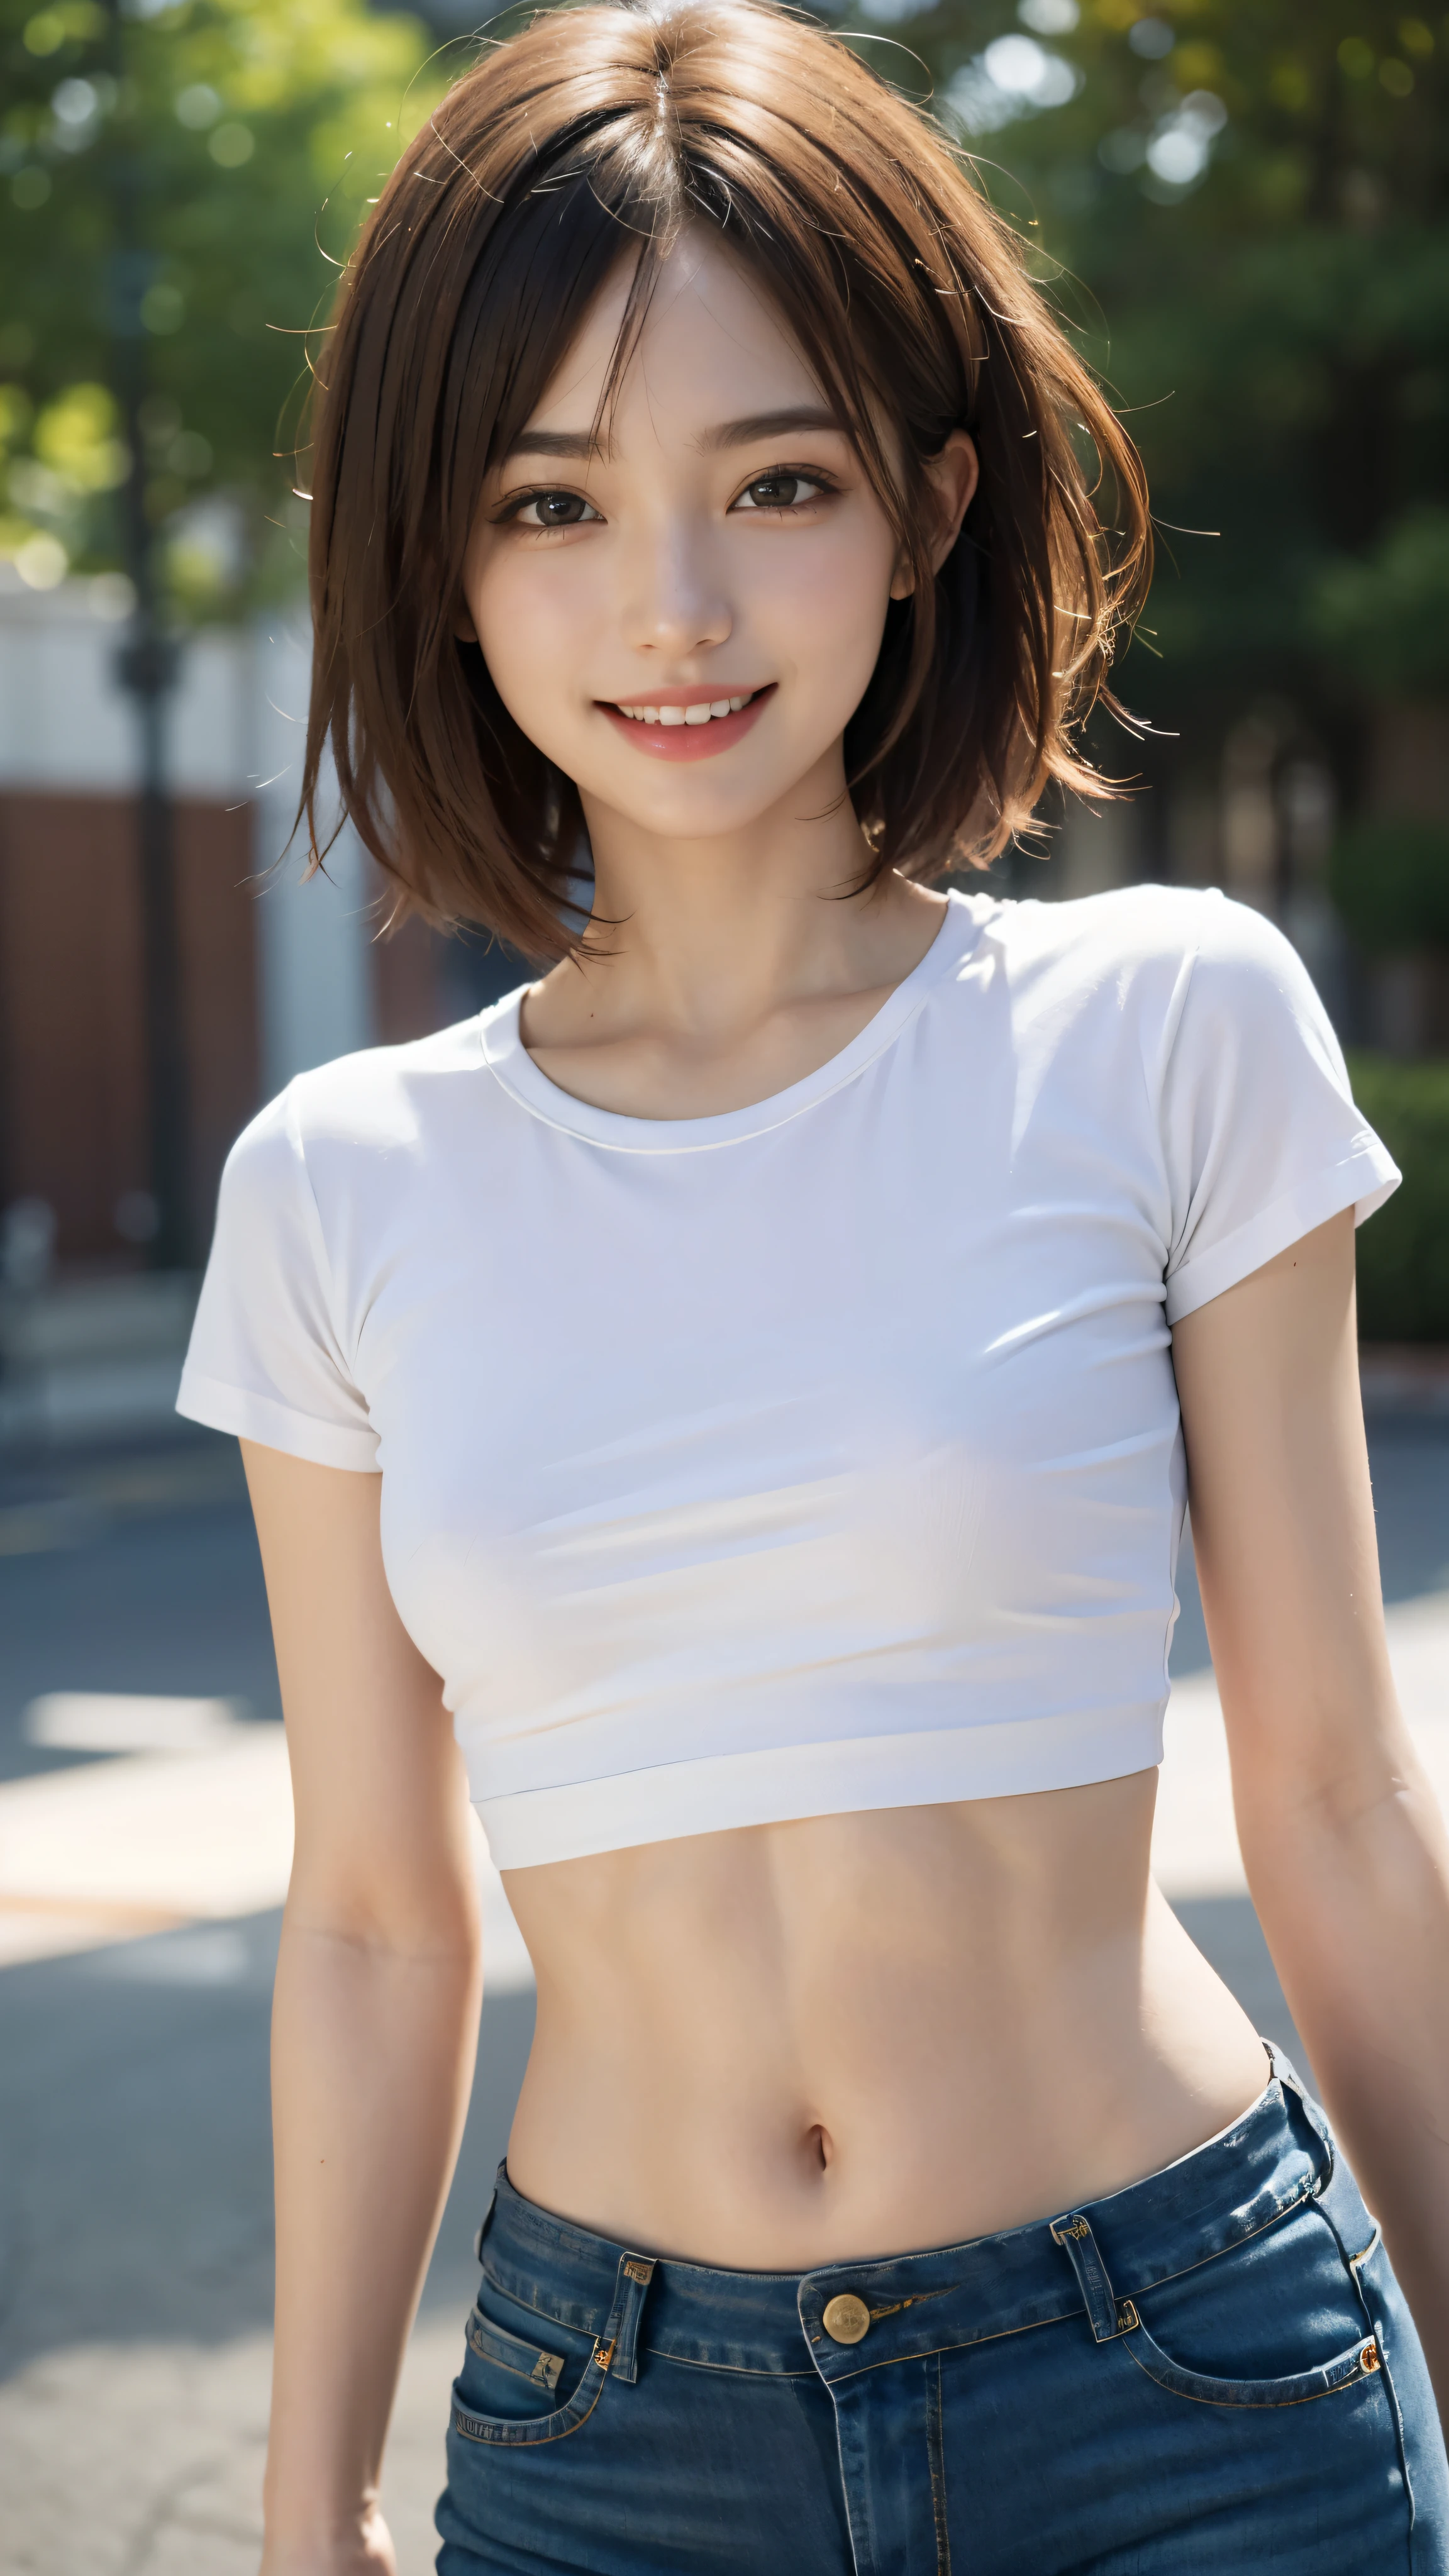 highest quality, pieces fly, ultra high resolution, (that&#39;realistic:1.4), RAW photo, 1 girl, Mr. Kｰpop idol, brown short hair, slender body,stomach,stomach筋,muscular,jeans and a small t-shirt,fine eyes,(realistic eyes),delicate face,realsMr. Kin,slightly tanned skin、fine hair,Detailed sMr. Kin,cute face,((smile))、((laughter))、((you look happy, smile))